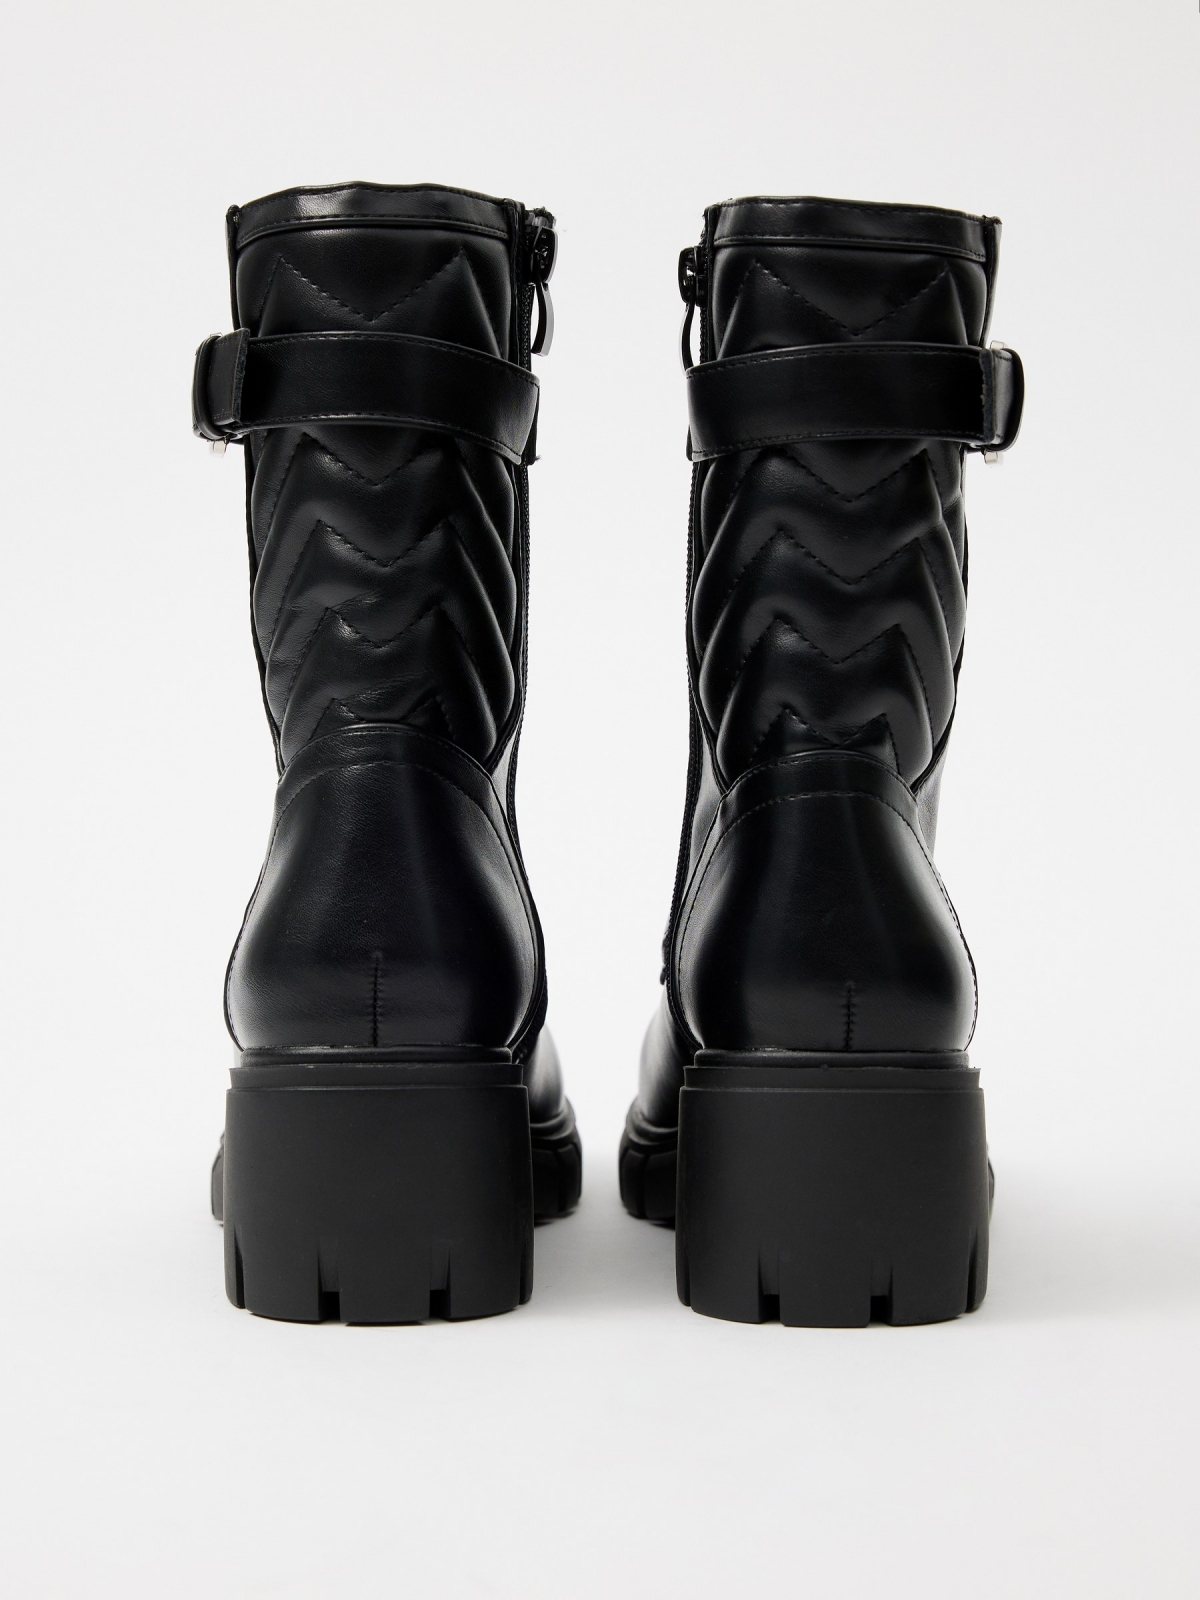 Buckle track sole ankle boot black detail view